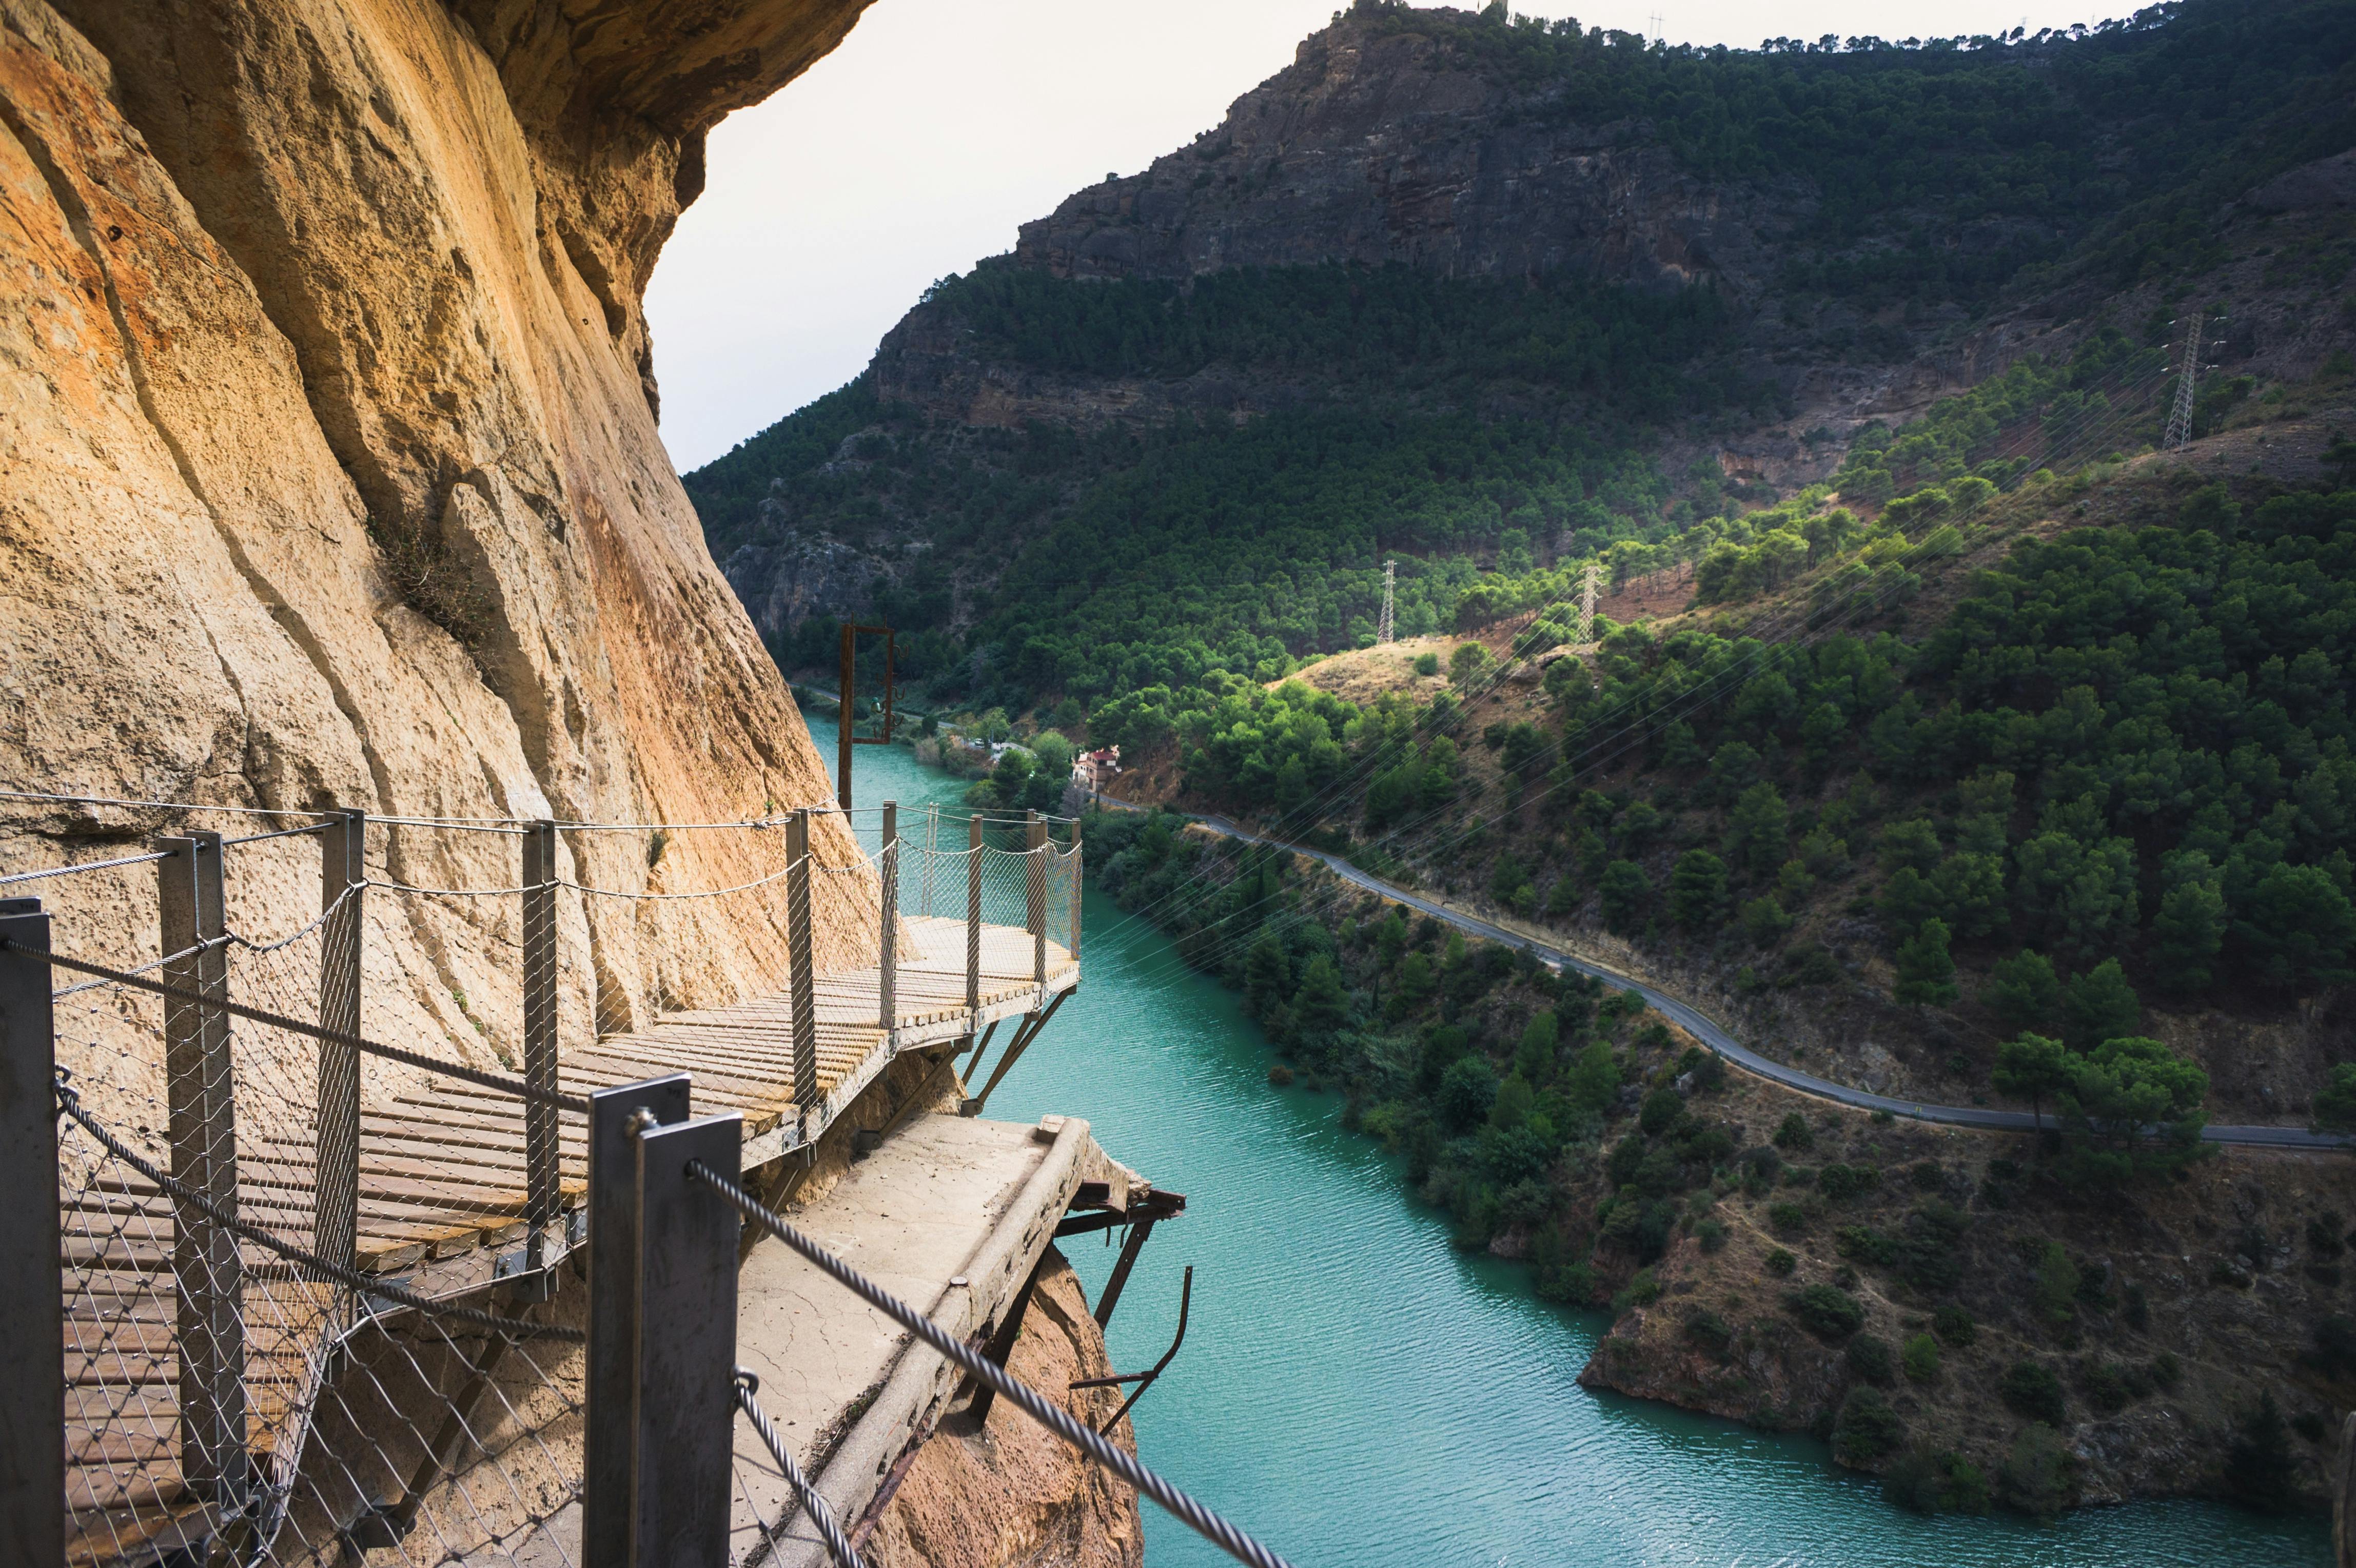 Caminito del Rey guided tour with shuttle bus from El Chorro Musement